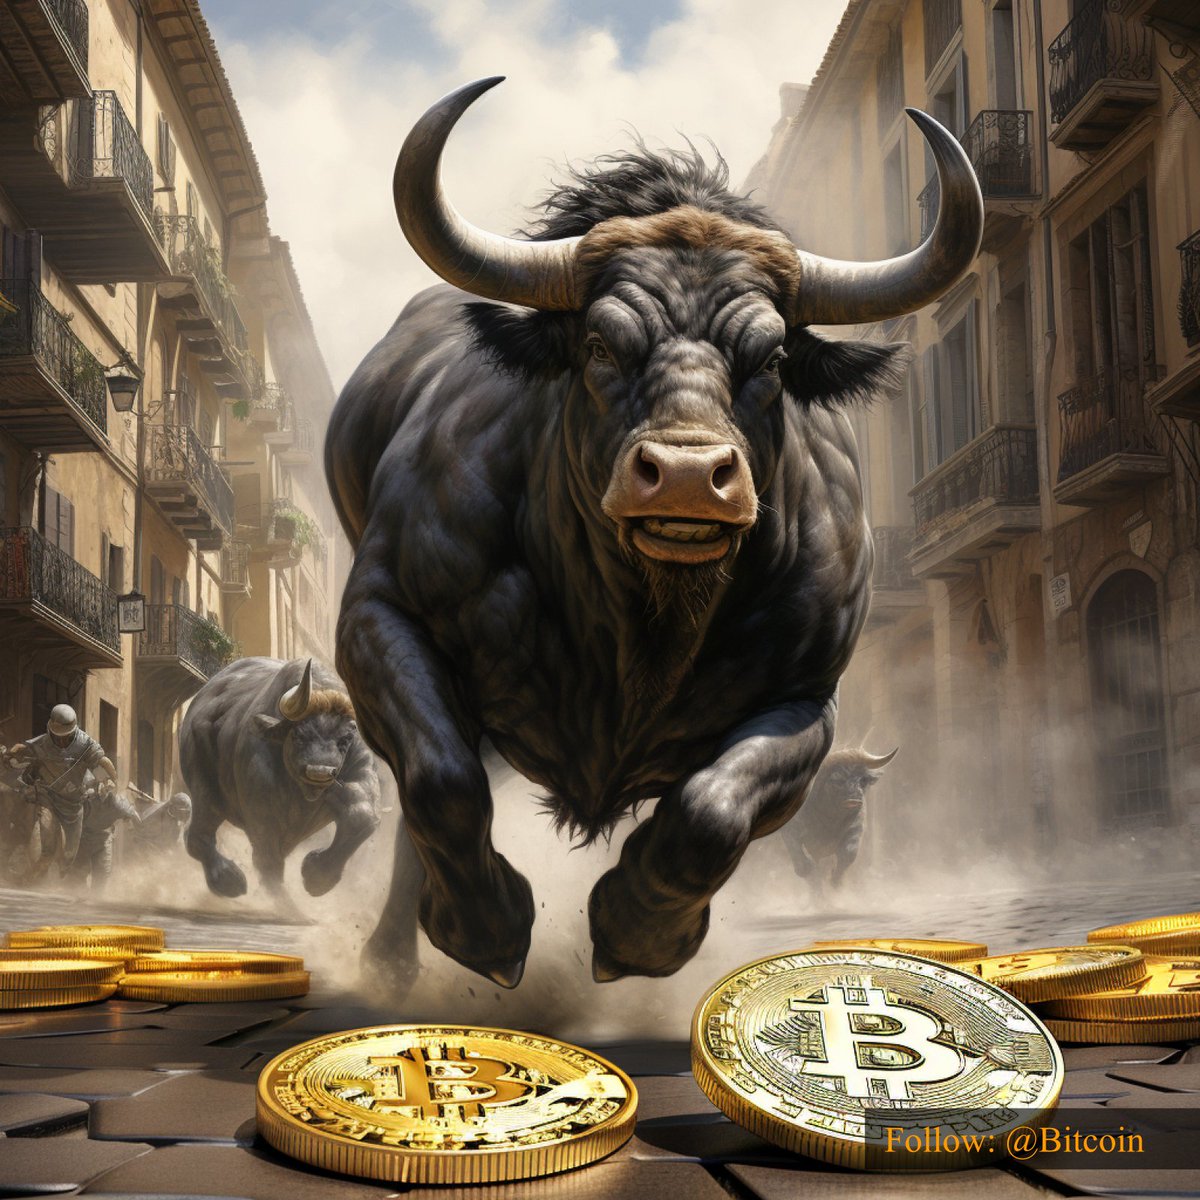 The horns of promise are about to gleam, for the bull market roars on the horizon, ready to charge into a realm of soaring values and bullish dreams. #Bitcoin    🤘